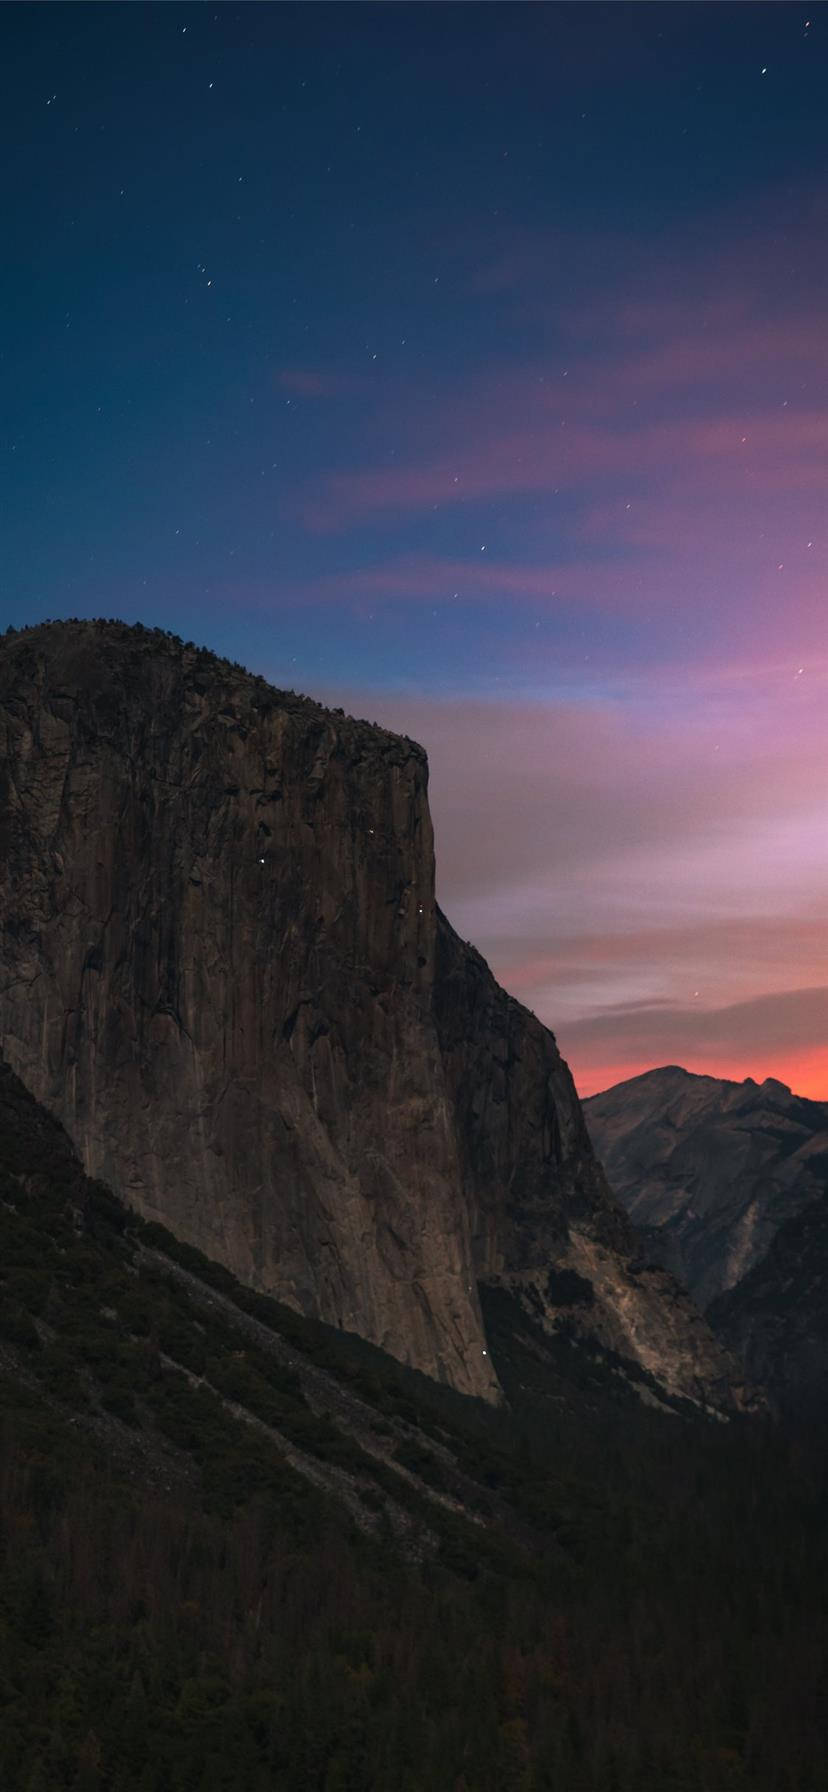 Enjoy the inspiring views of Yosemite National Park on your iPhone Wallpaper